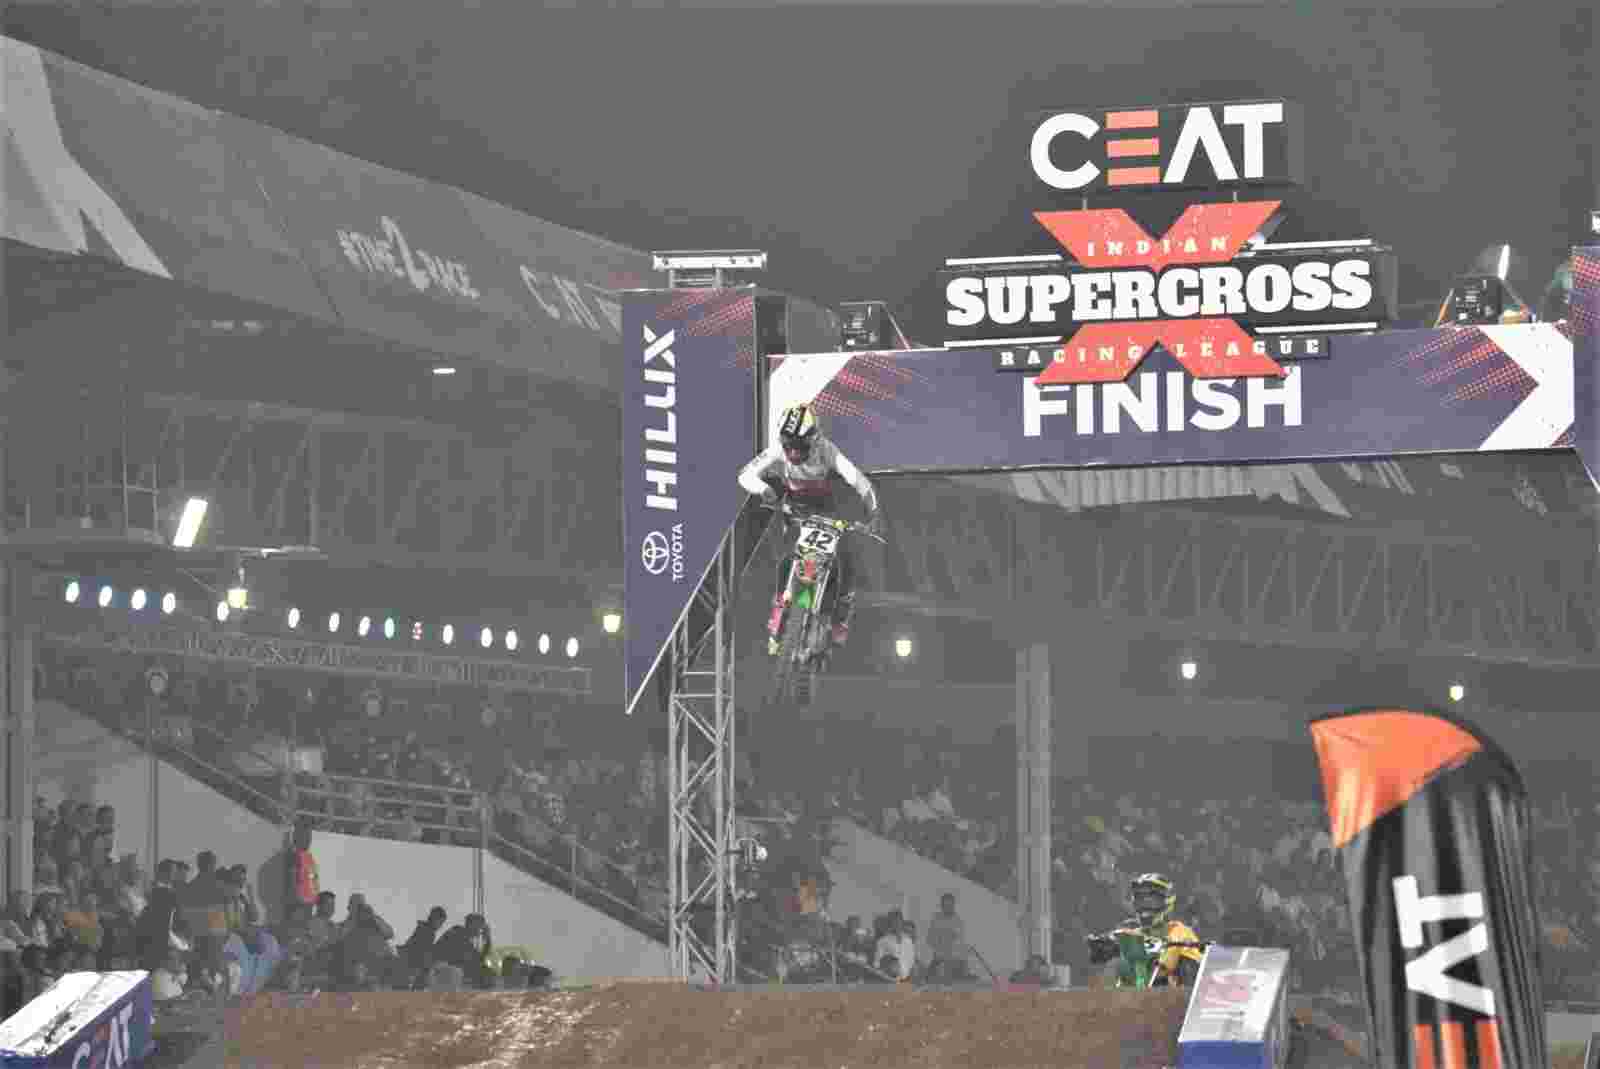 Pune : Bigrock Motorsport Led by C S Santosh Leads Inaugural Race For The  CEAT Indian Supercross Racing League - PUNE PULSE